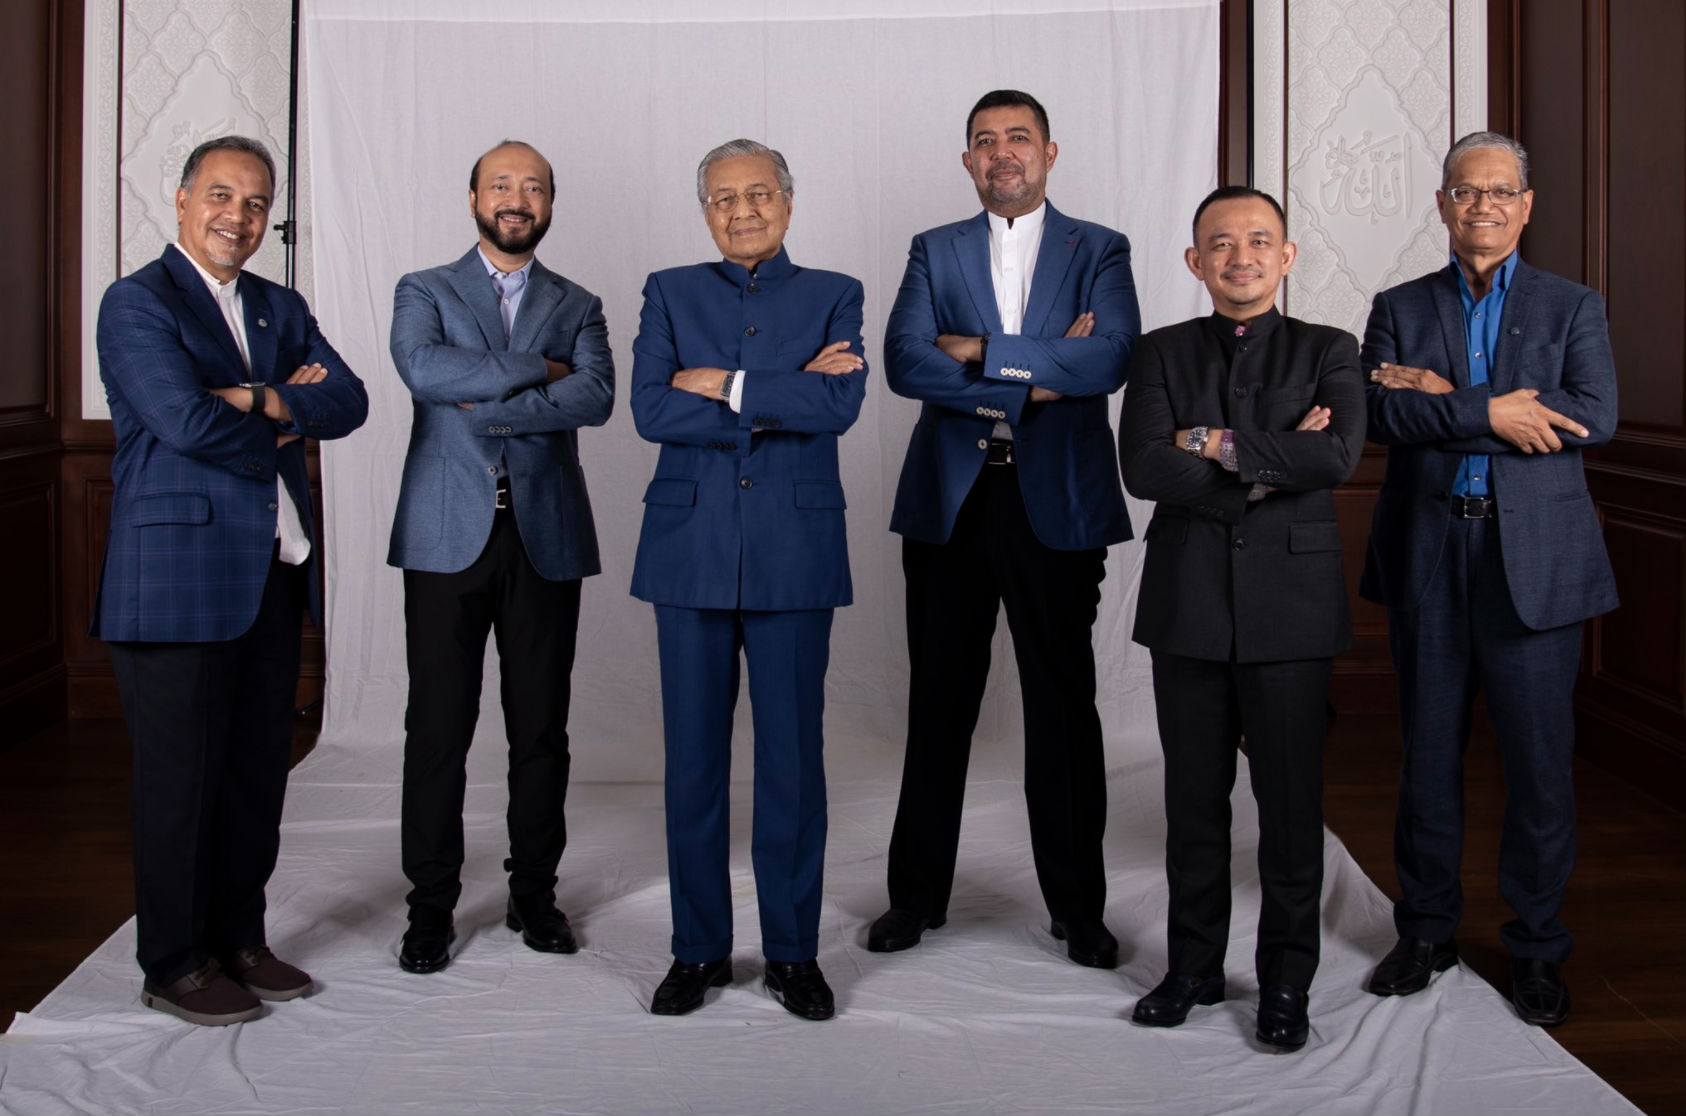 Mahathir Mohamad poses with five others in a photo he tweeted after announcing a new political party. Photo: Mahathir Mohamad 